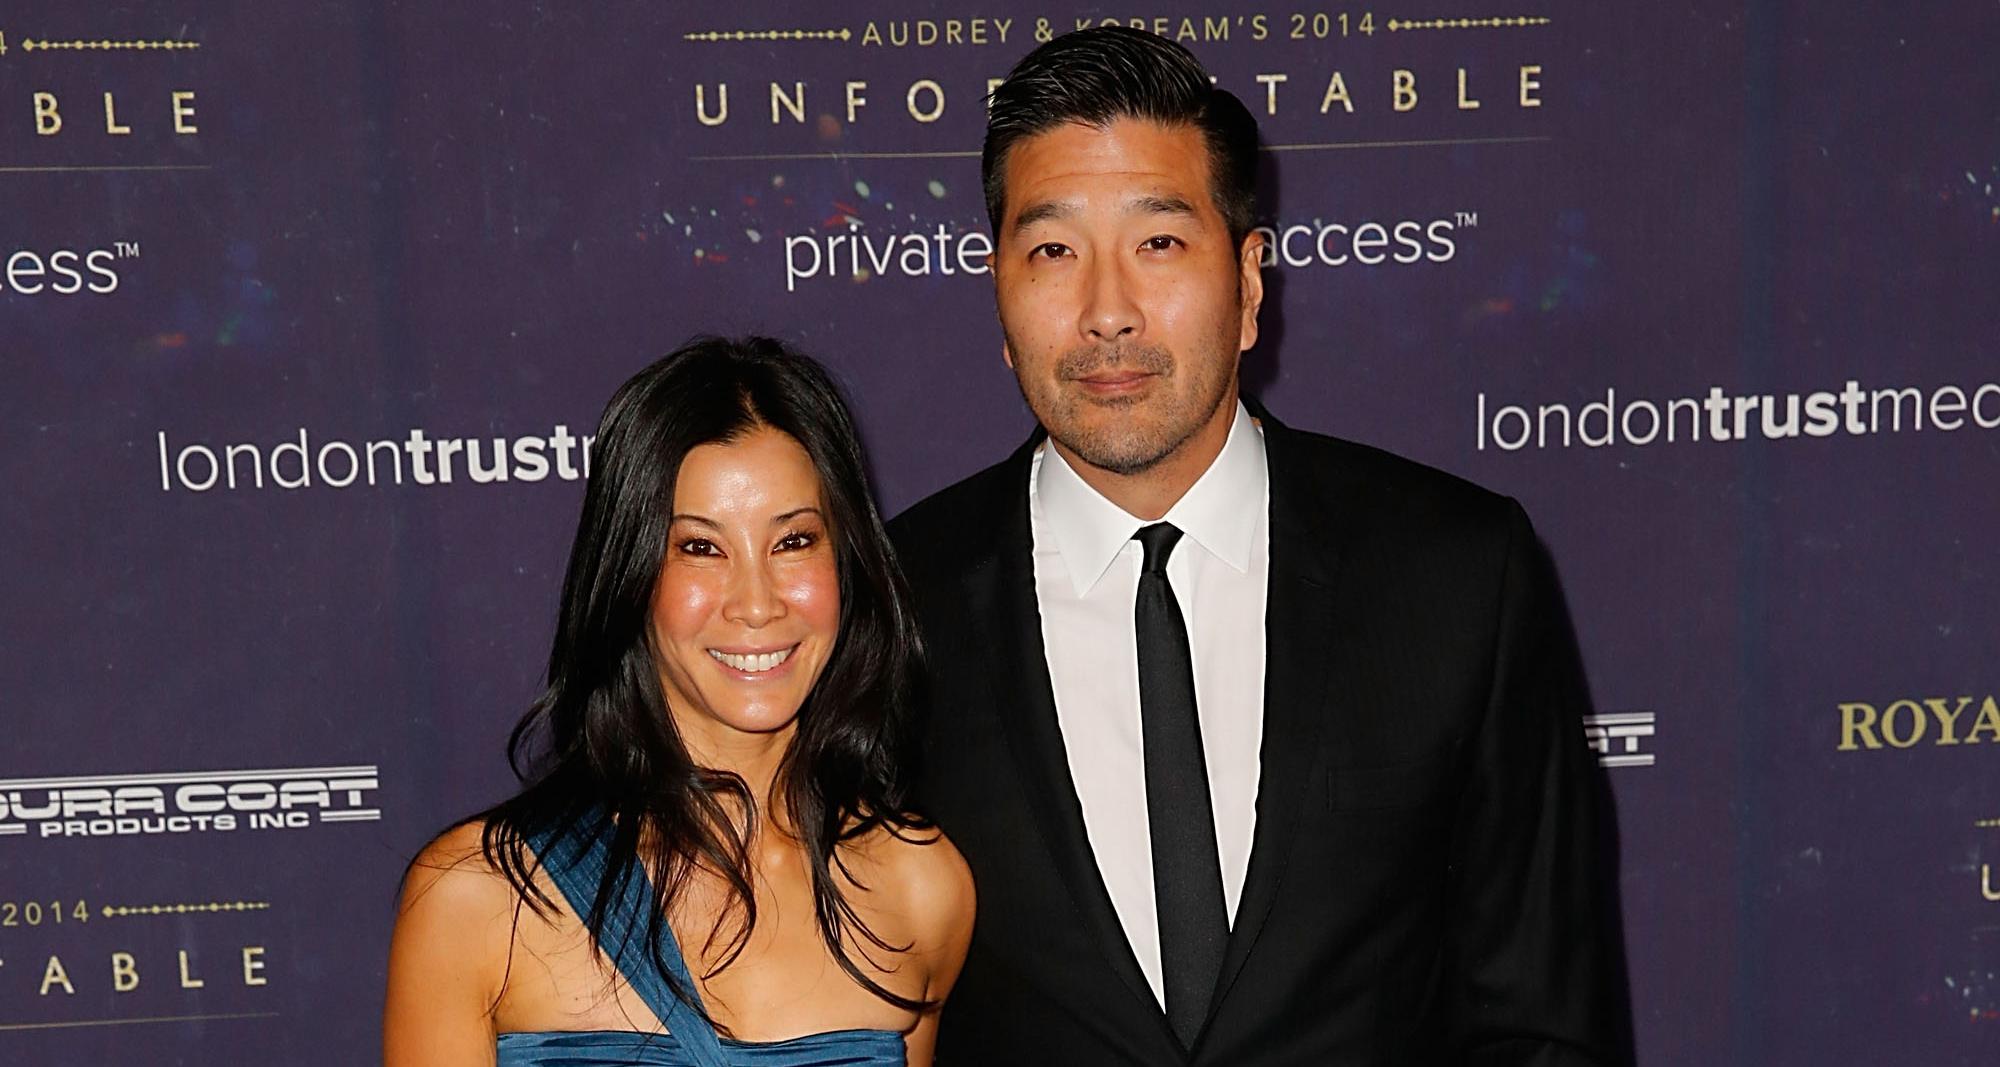 Lisa Ling and husband, Paul Song arrive at the 2014 Unforgettable Awards presented by Royal Salute at the Park Plaza Hotel